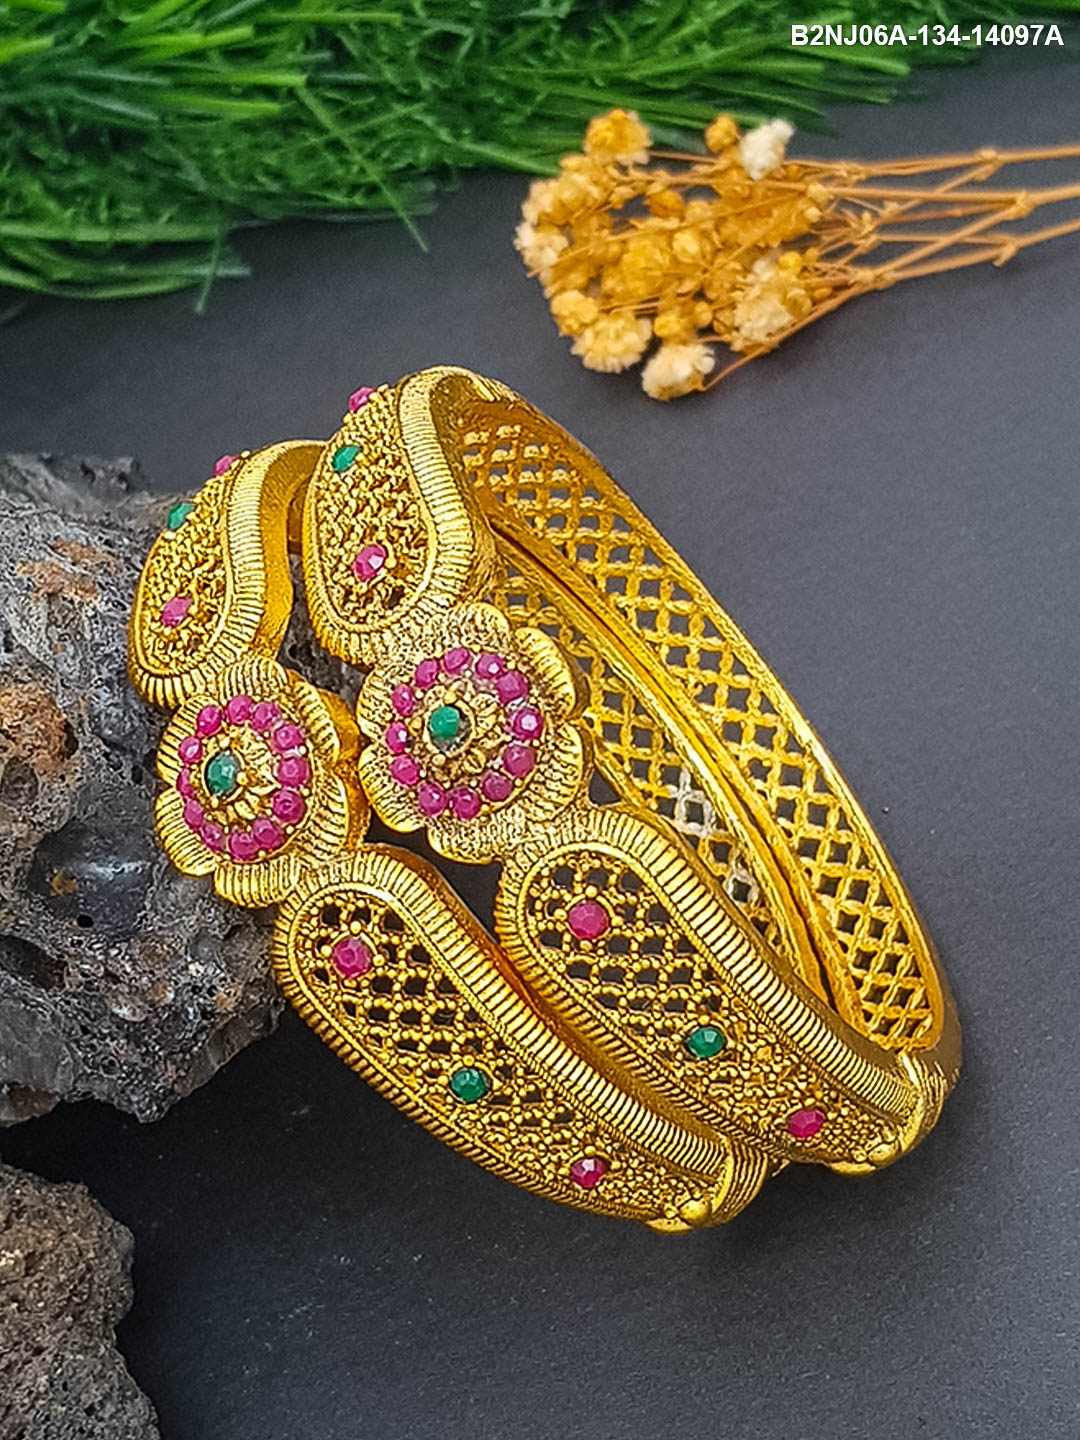 Gold Finish Set of 2  Bangles with Studded stones 14097A